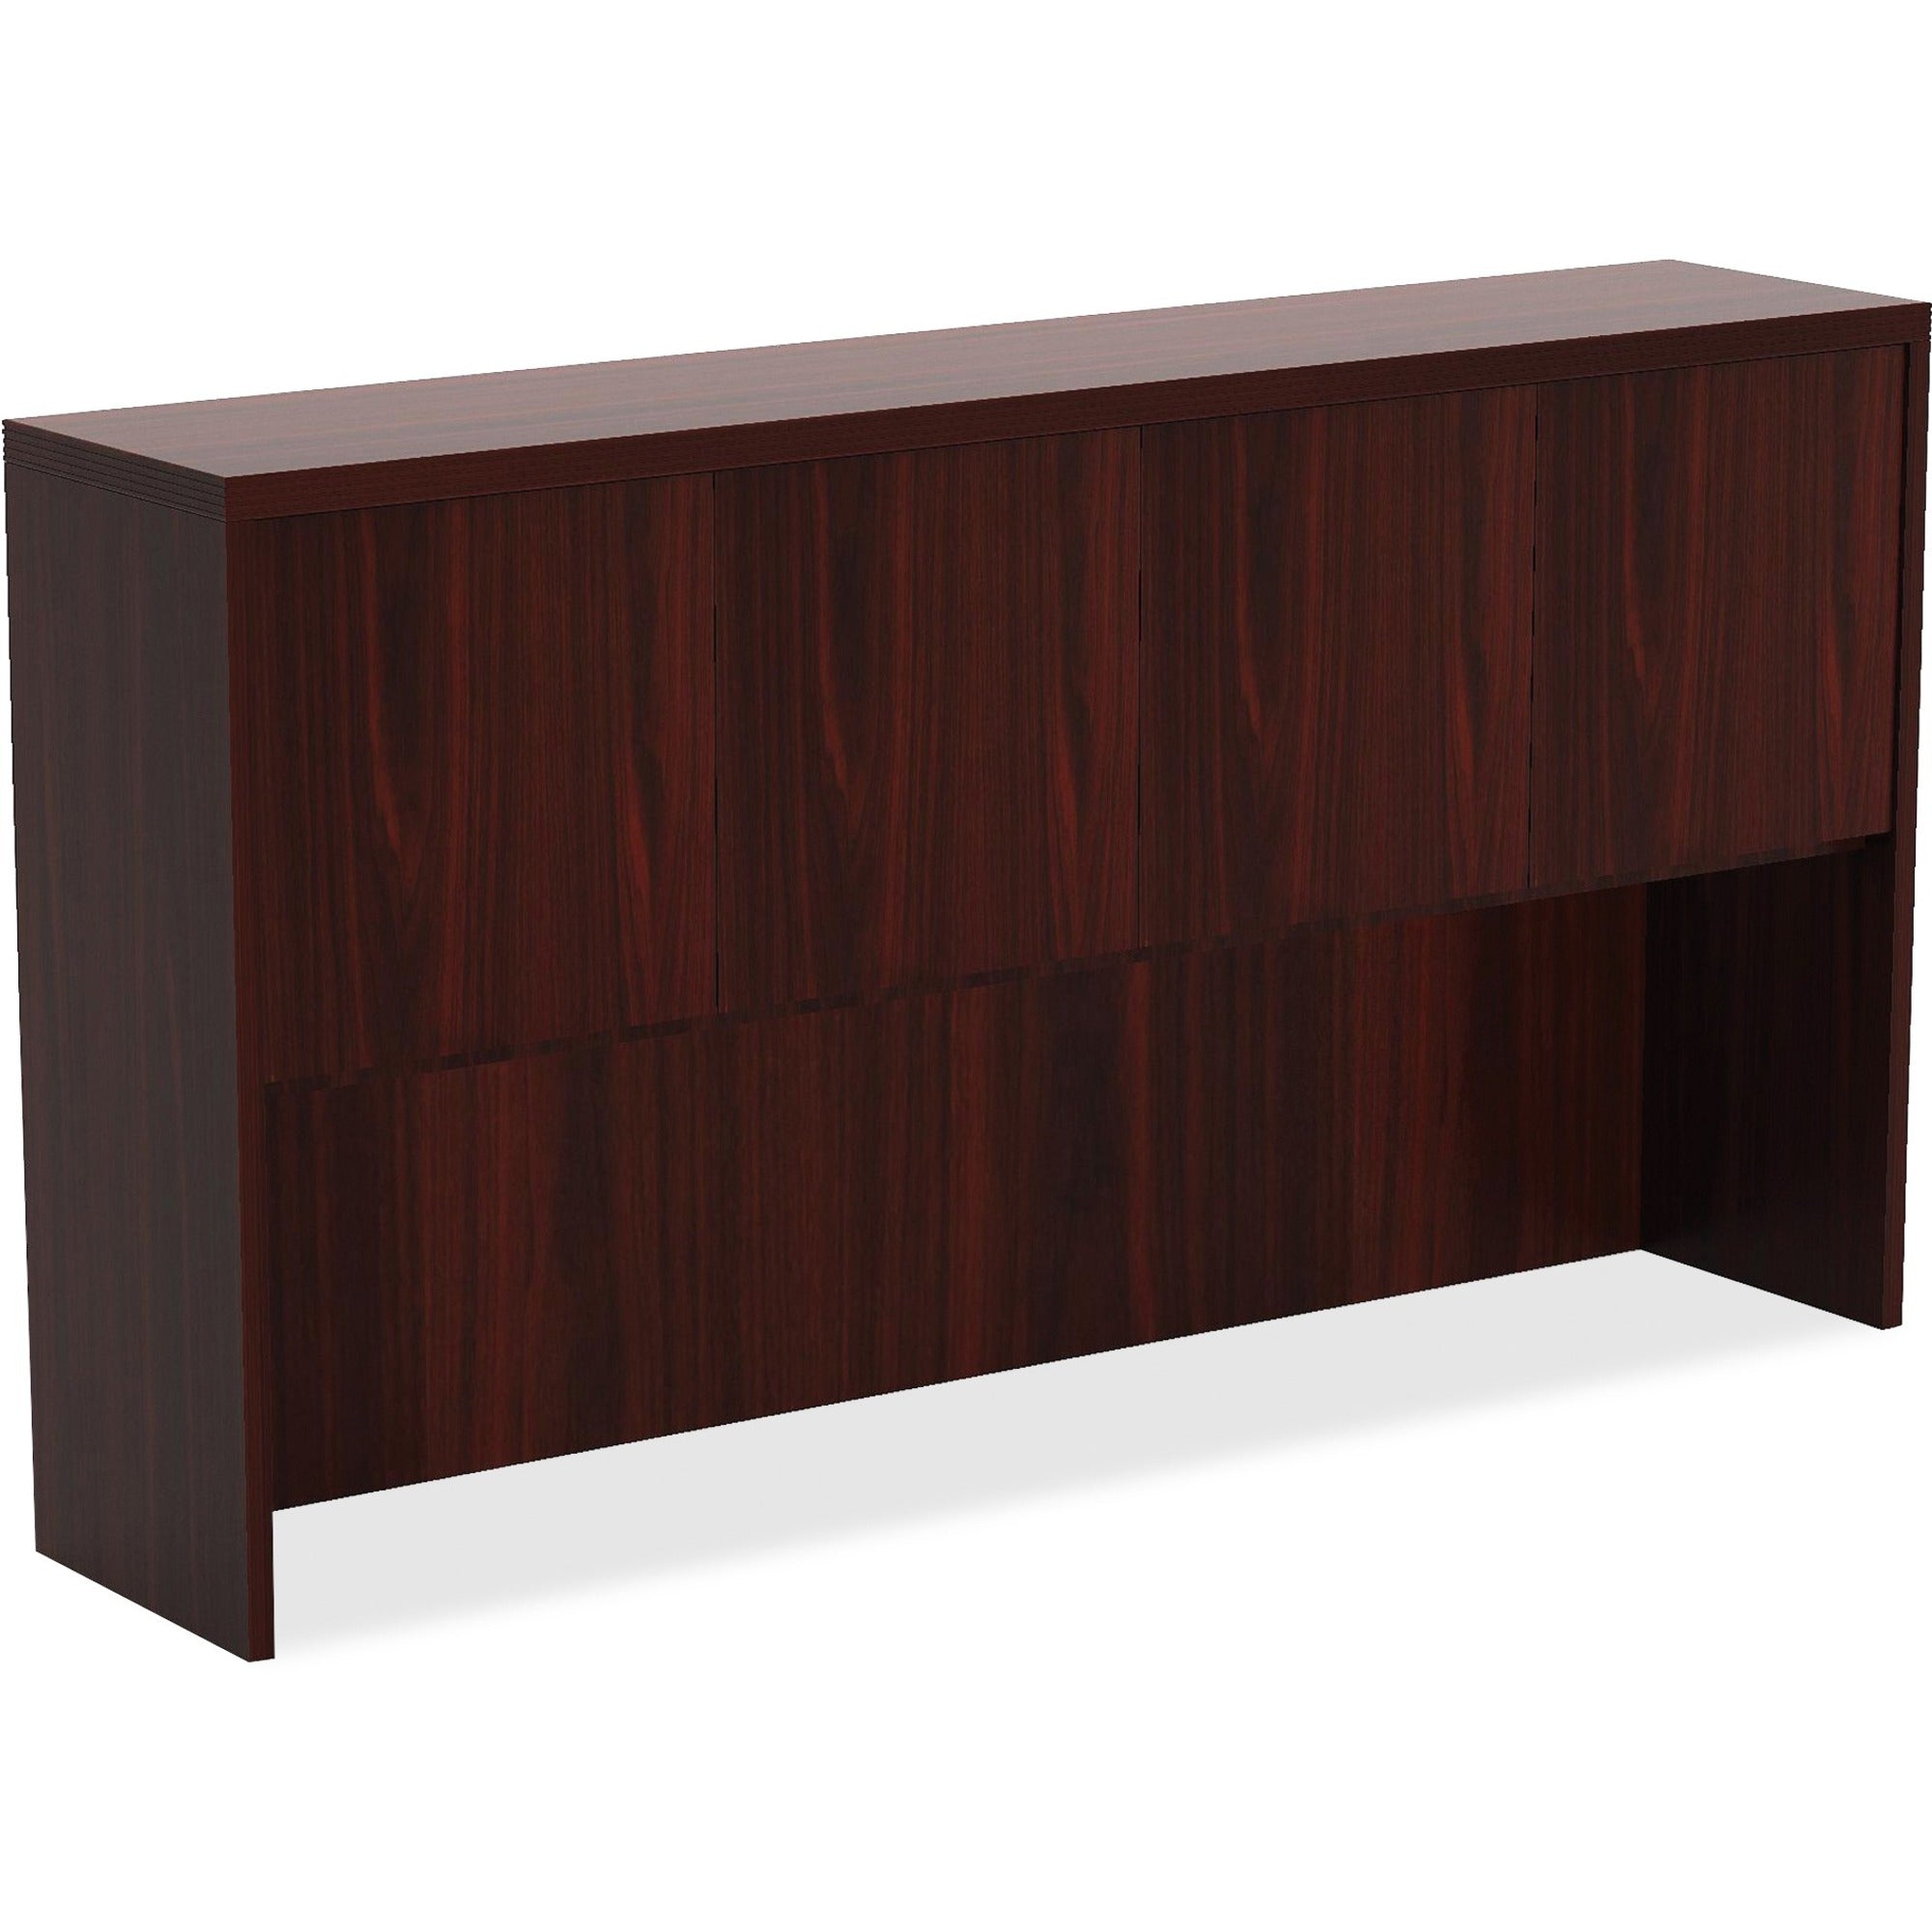 Lorell Chateau Series Hutch - 70.9" x 14.8"36.5" Hutch, 1.5" Top - 4 Door(s) - Reeded Edge - Material: P2 Particleboard - Finish: Mahogany, Laminate - Durable - For Office - 